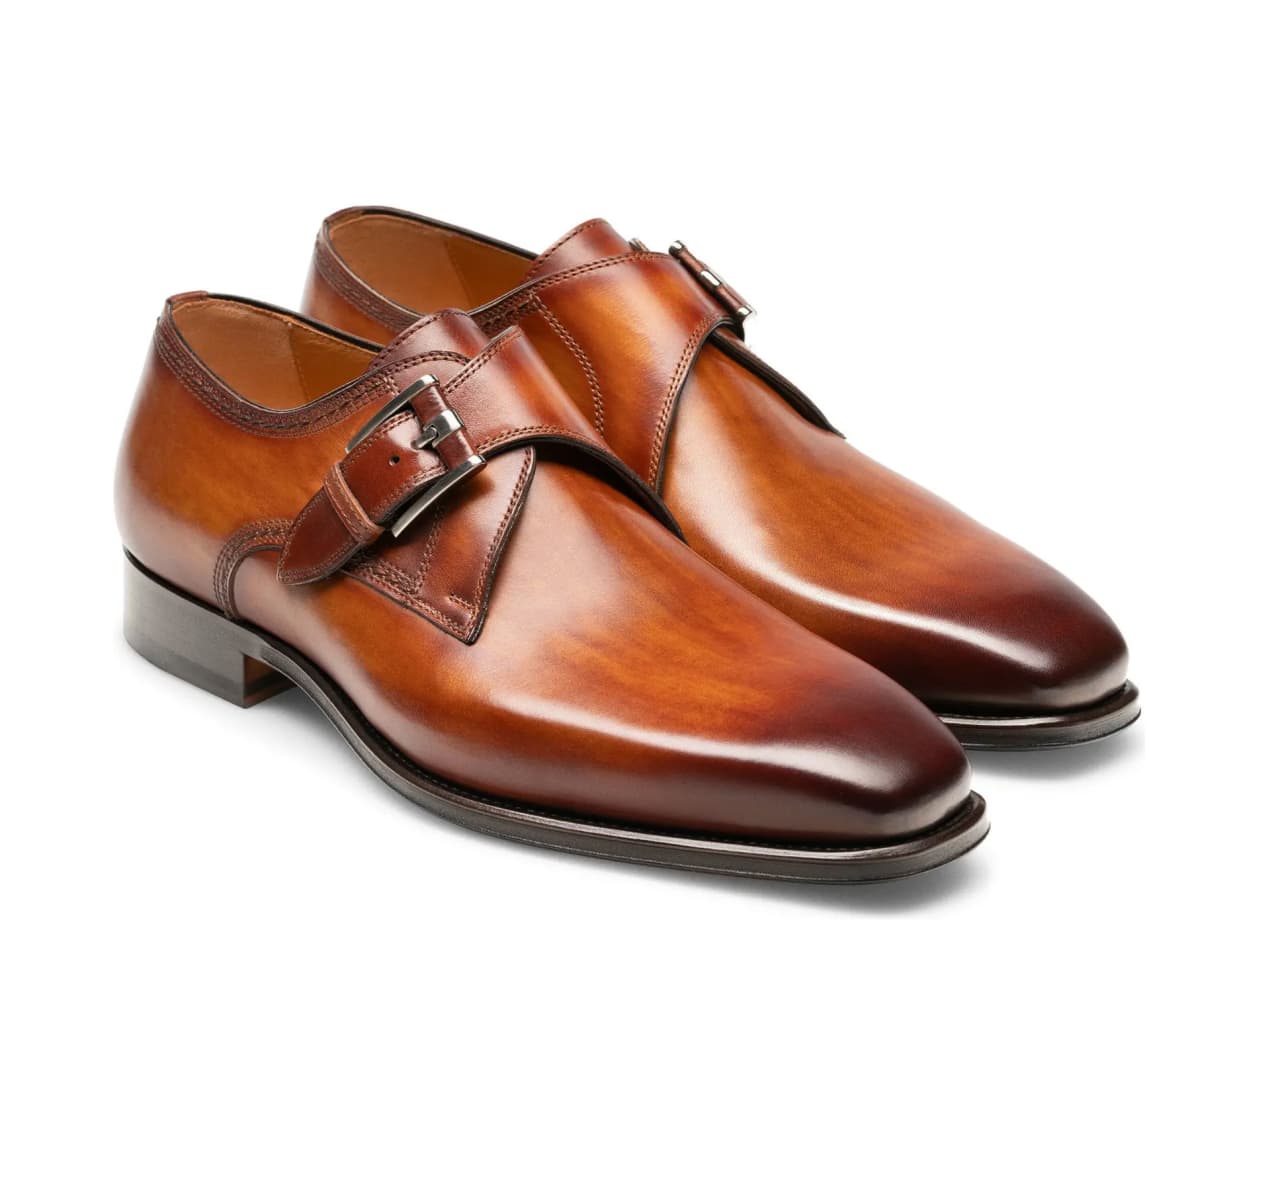 The best men's dress shoes to buy in 2023